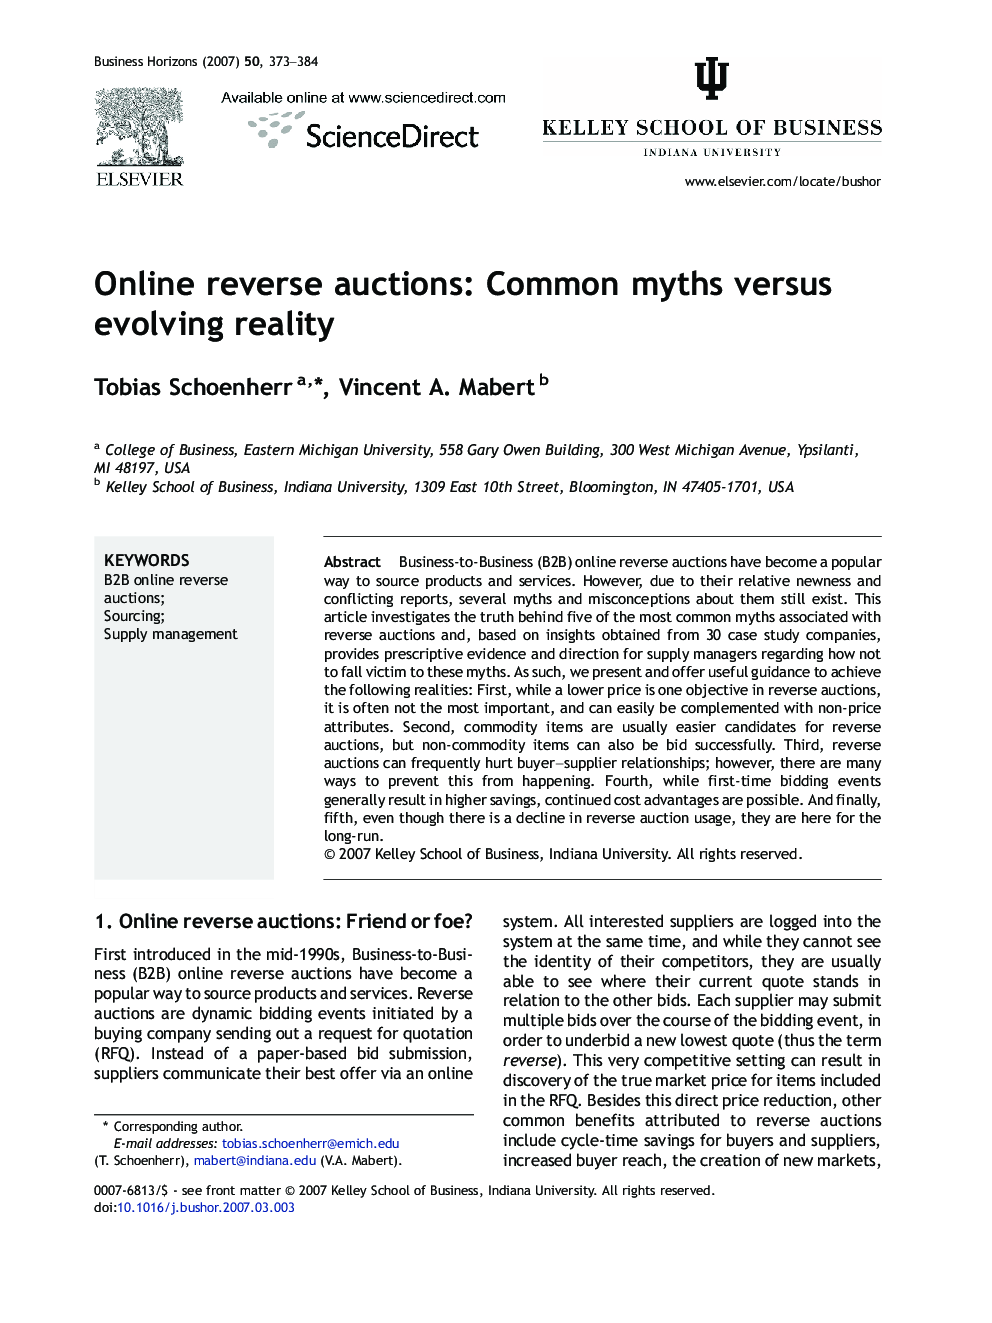 Online reverse auctions: Common myths versus evolving reality